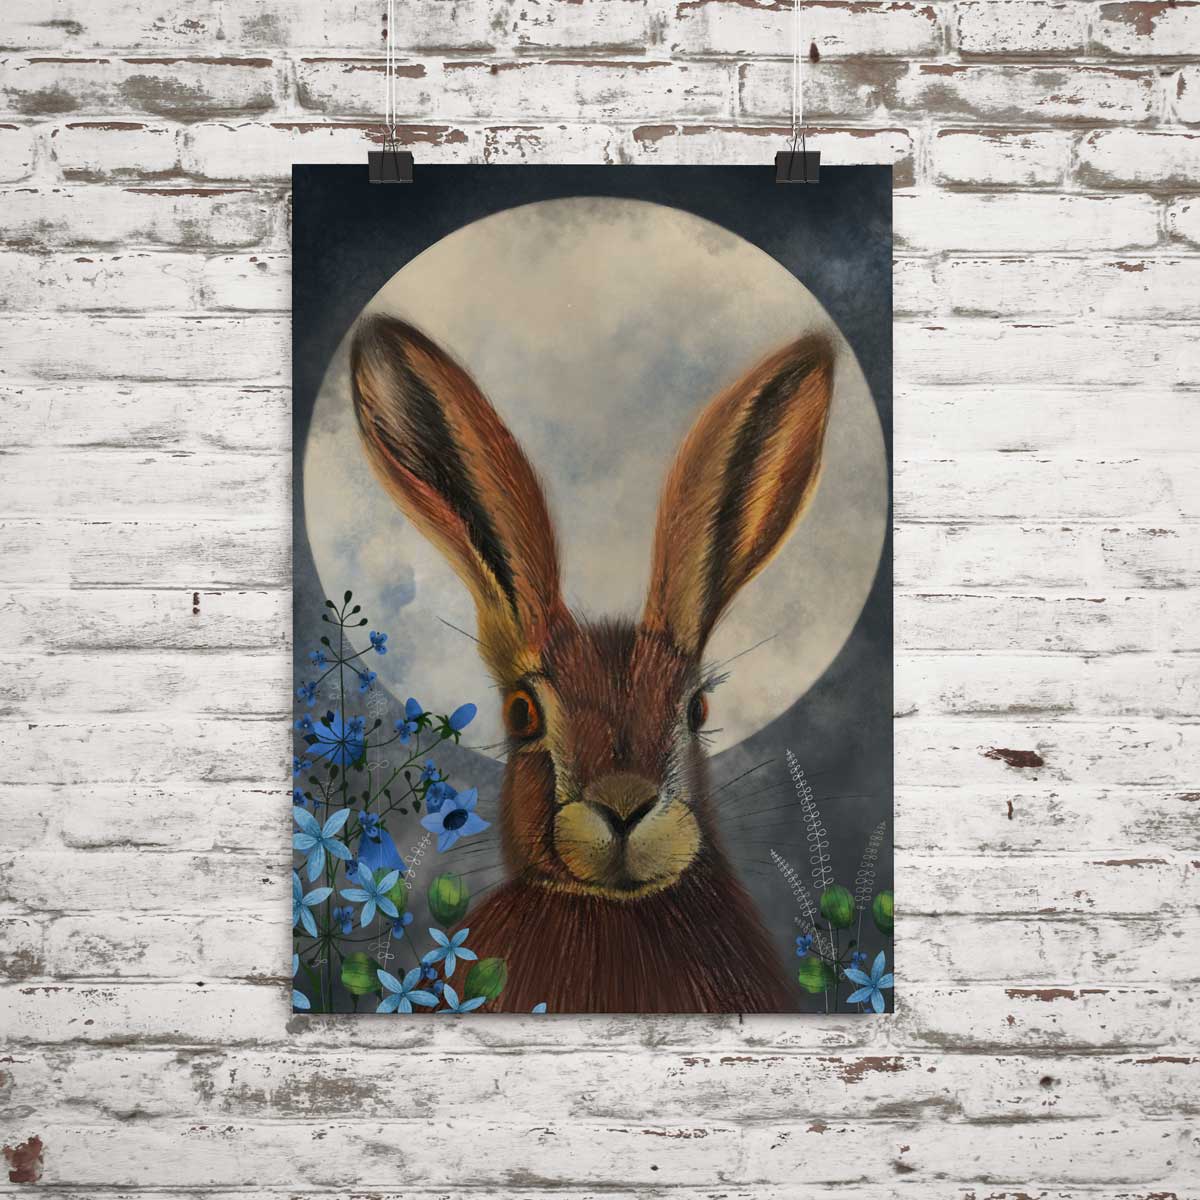 Unframed view of the moon hare illustration